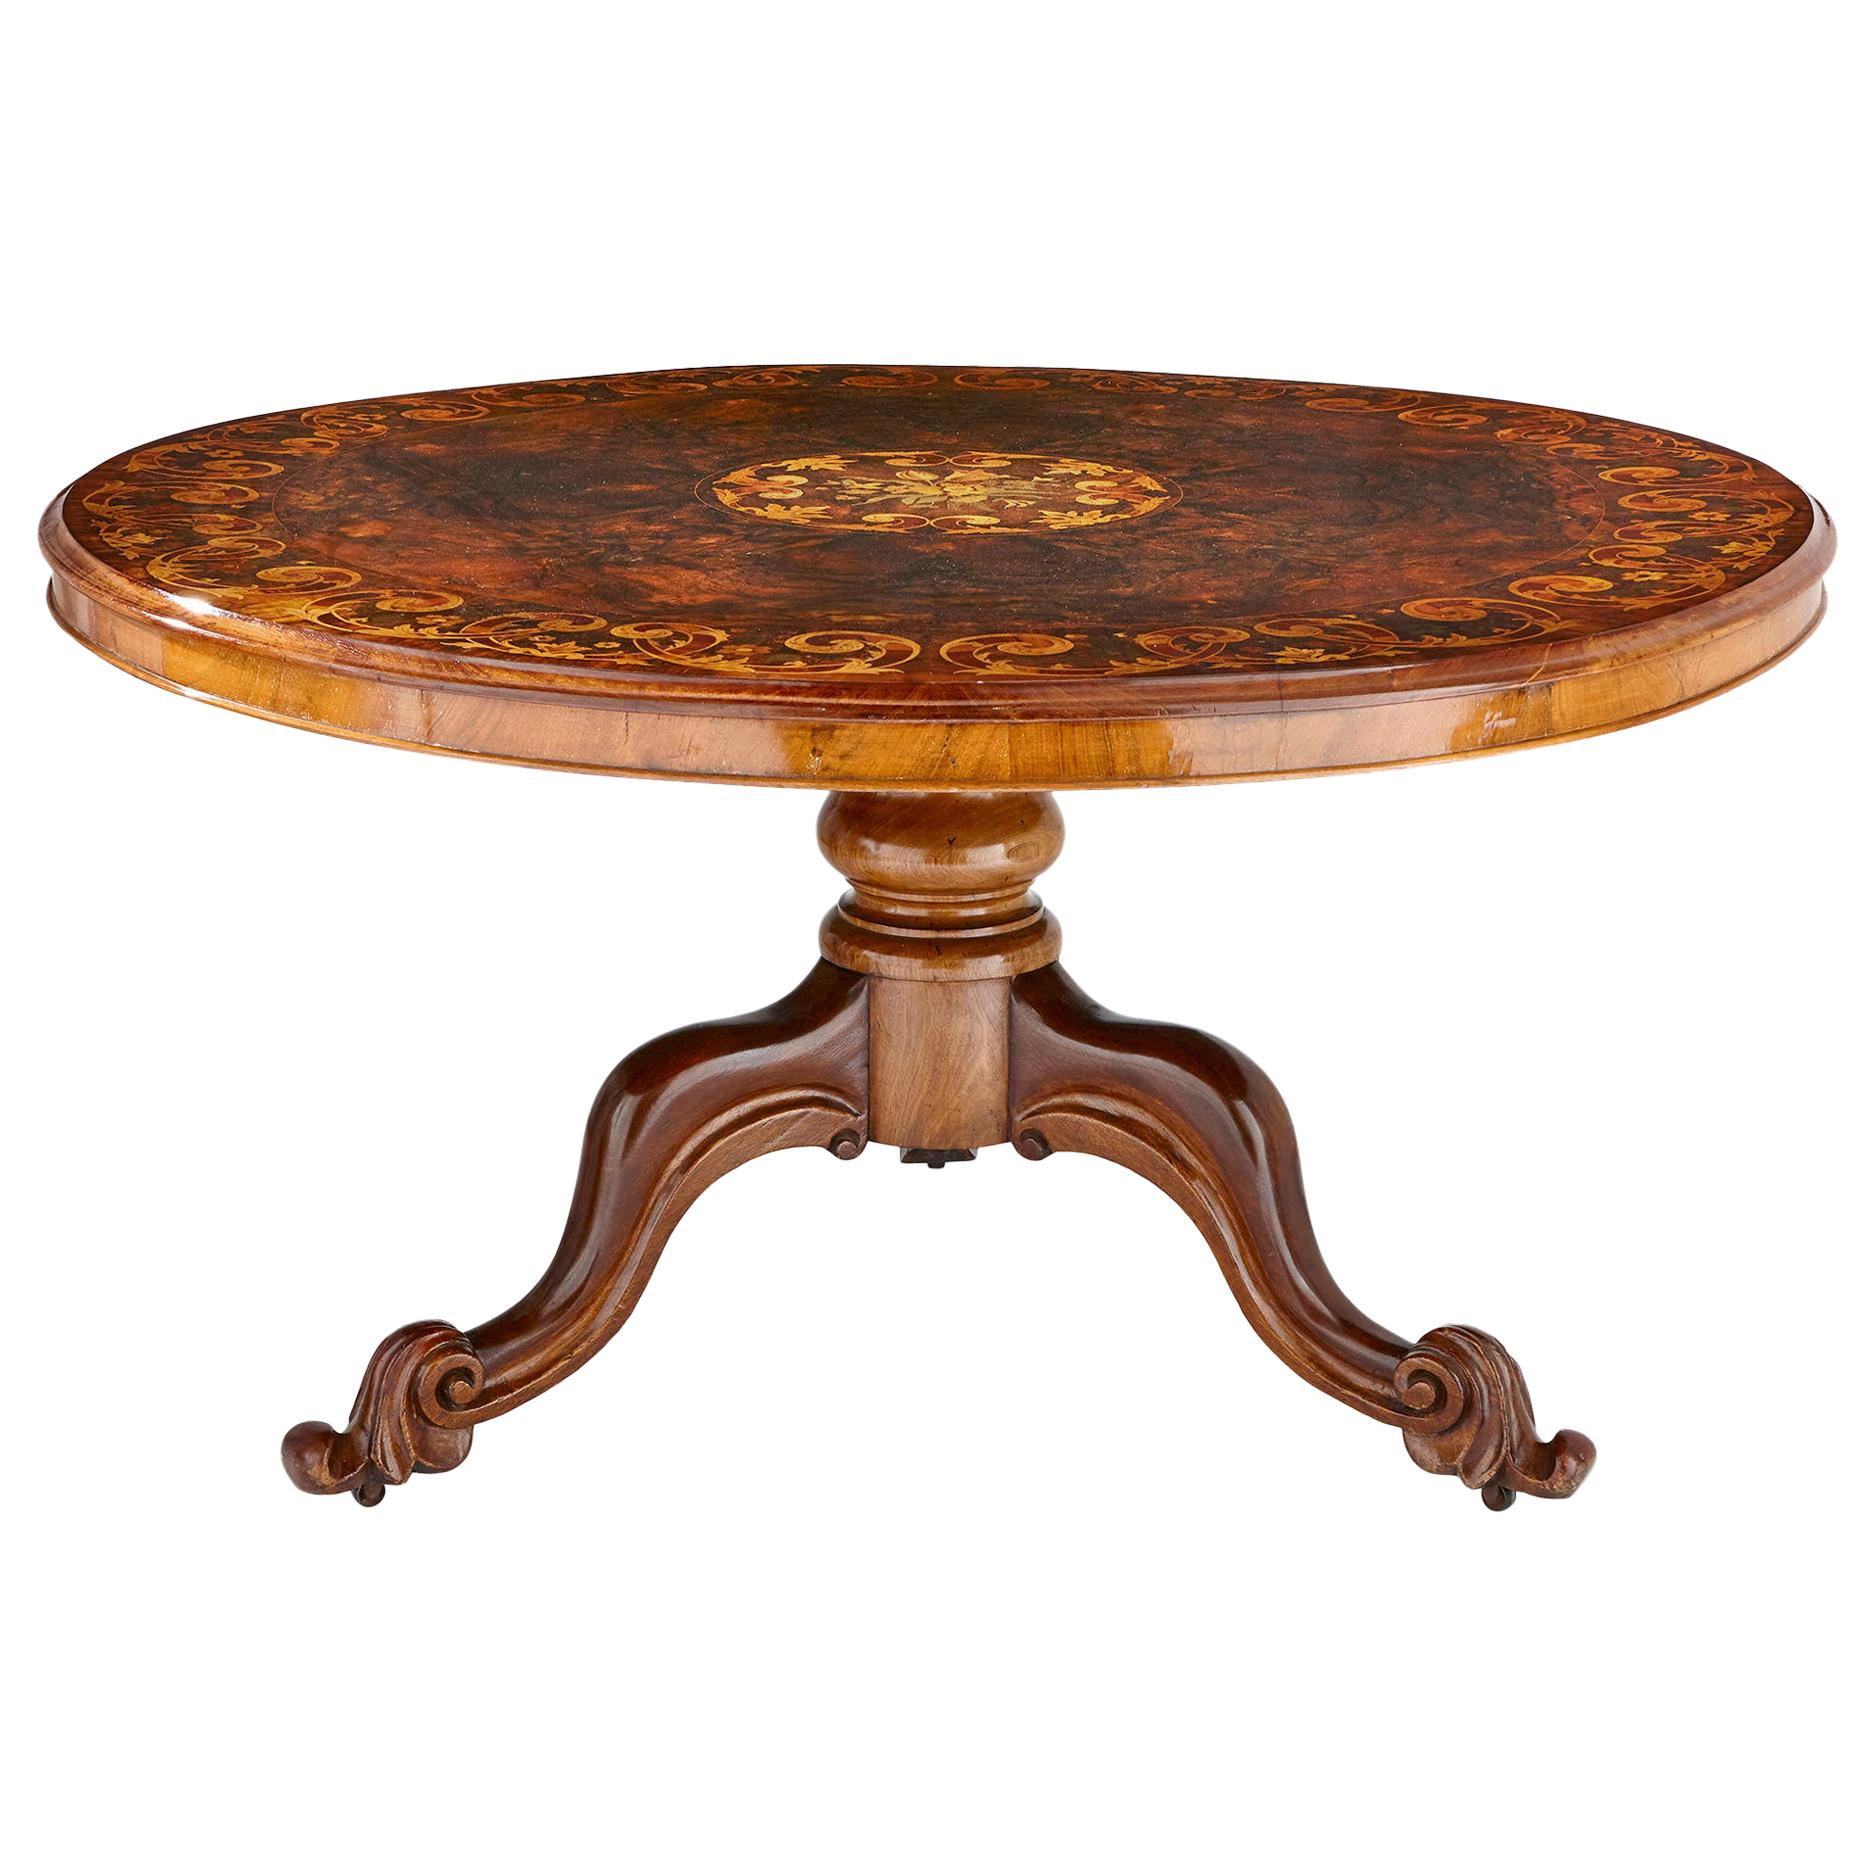 Antique Victorian Walnut and Marquetry Circular Table